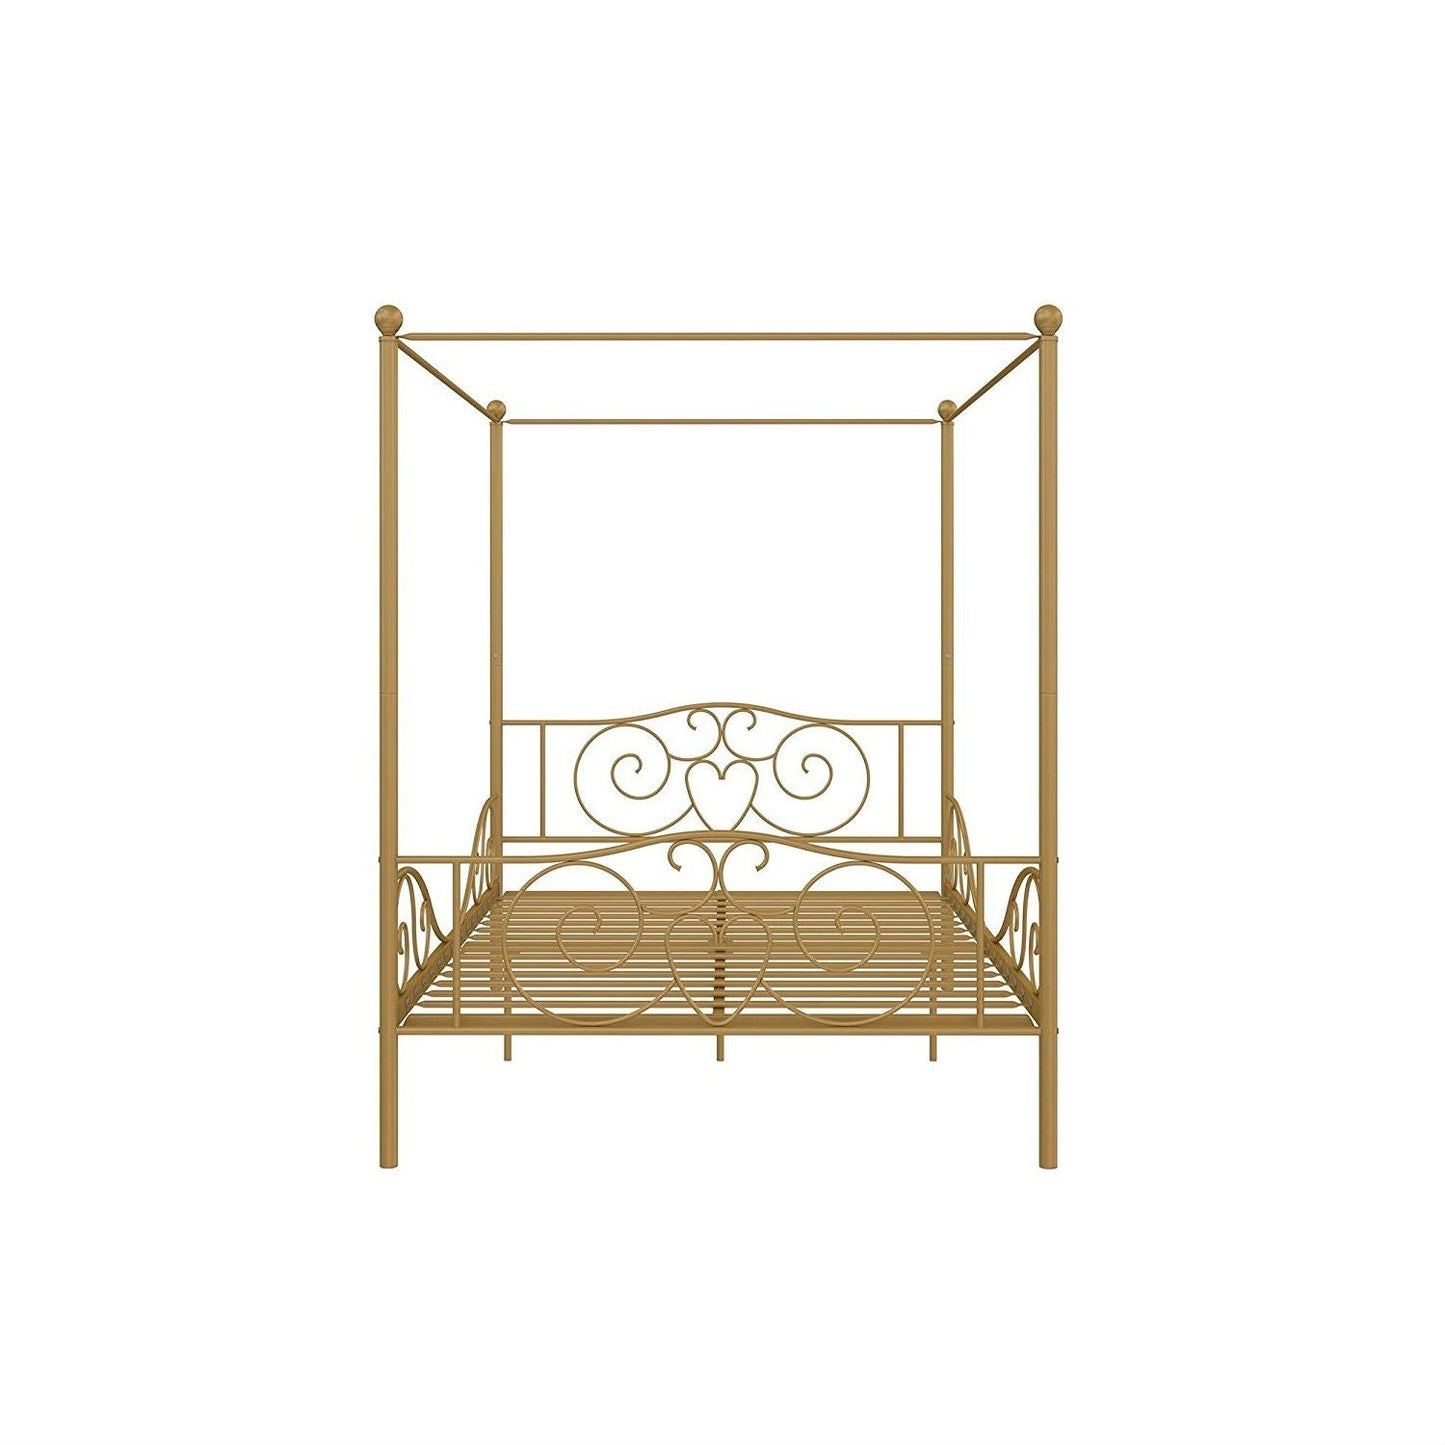 Bedroom > Bed Frames > Canopy Beds - Full Size Heavy Duty Metal Canopy Bed Frame In Gold Finish